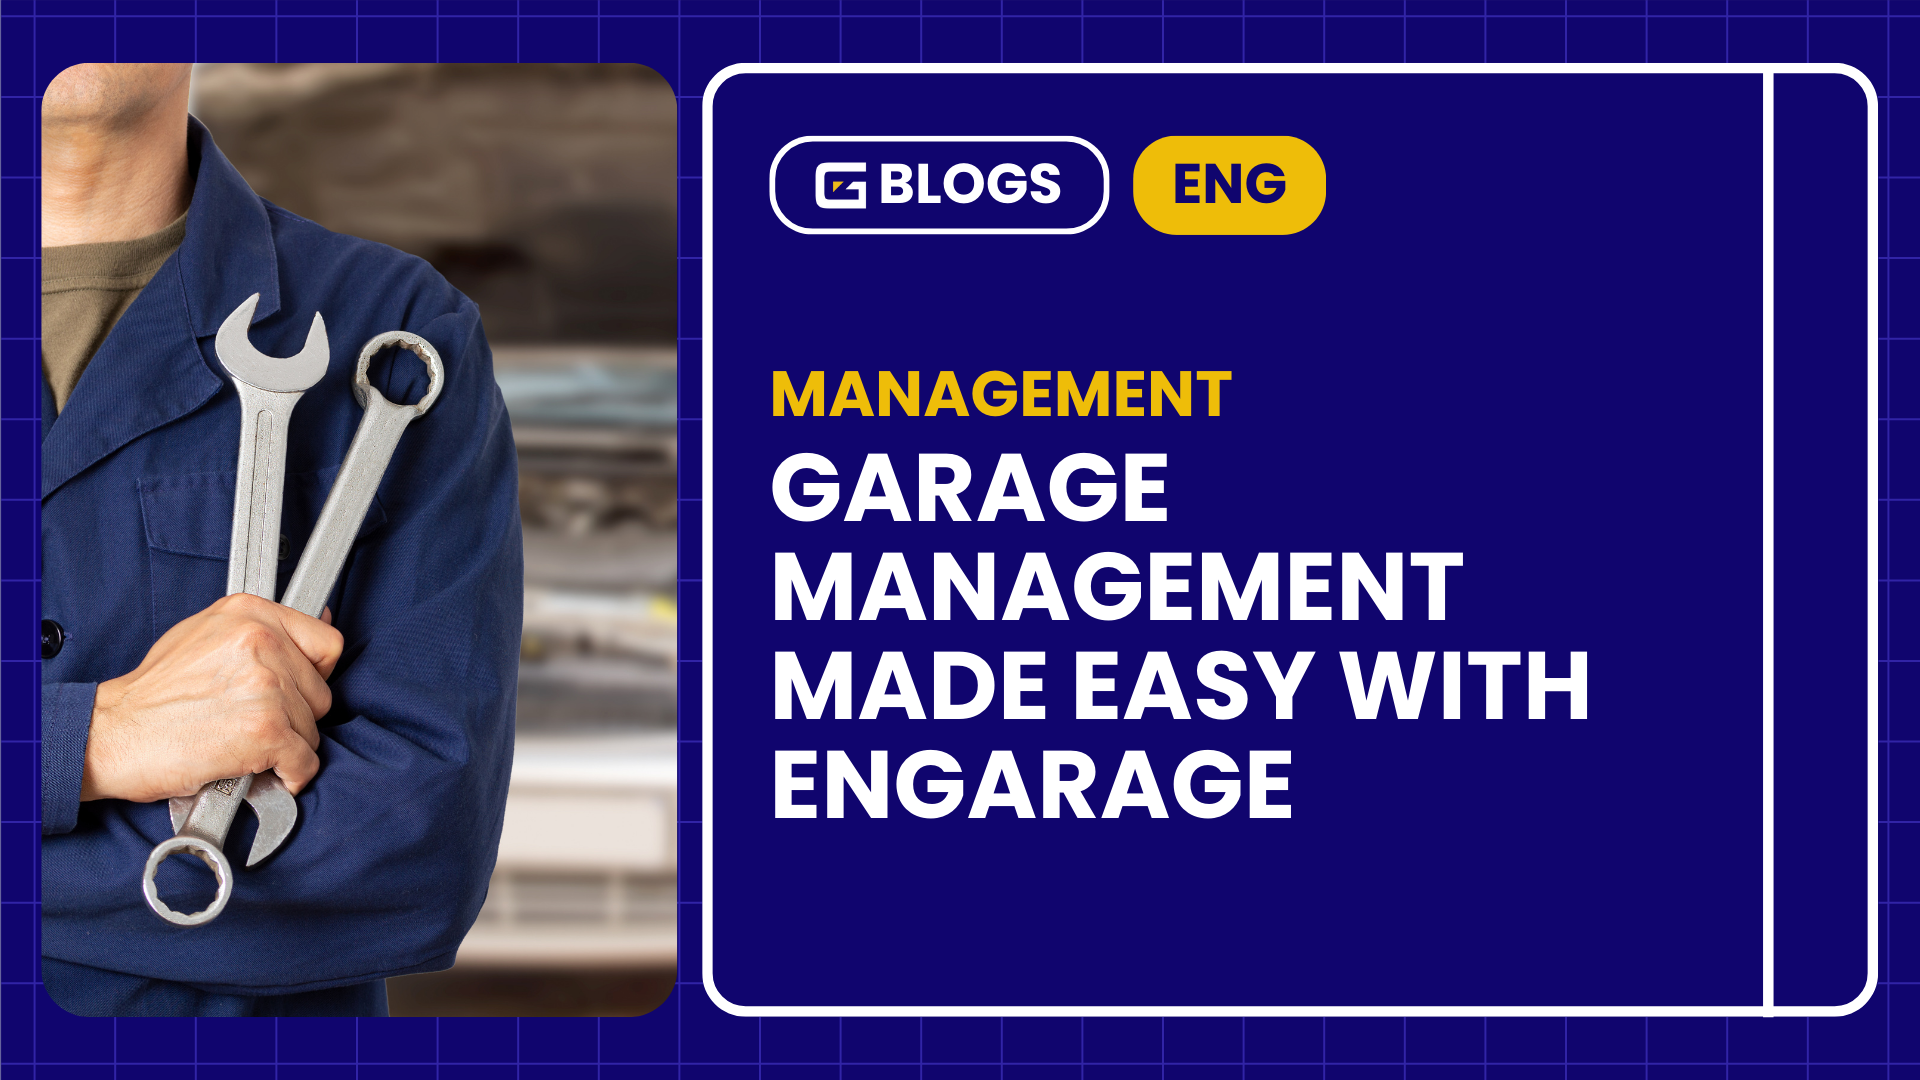 Garage Management Made Easy With ENGARAGE